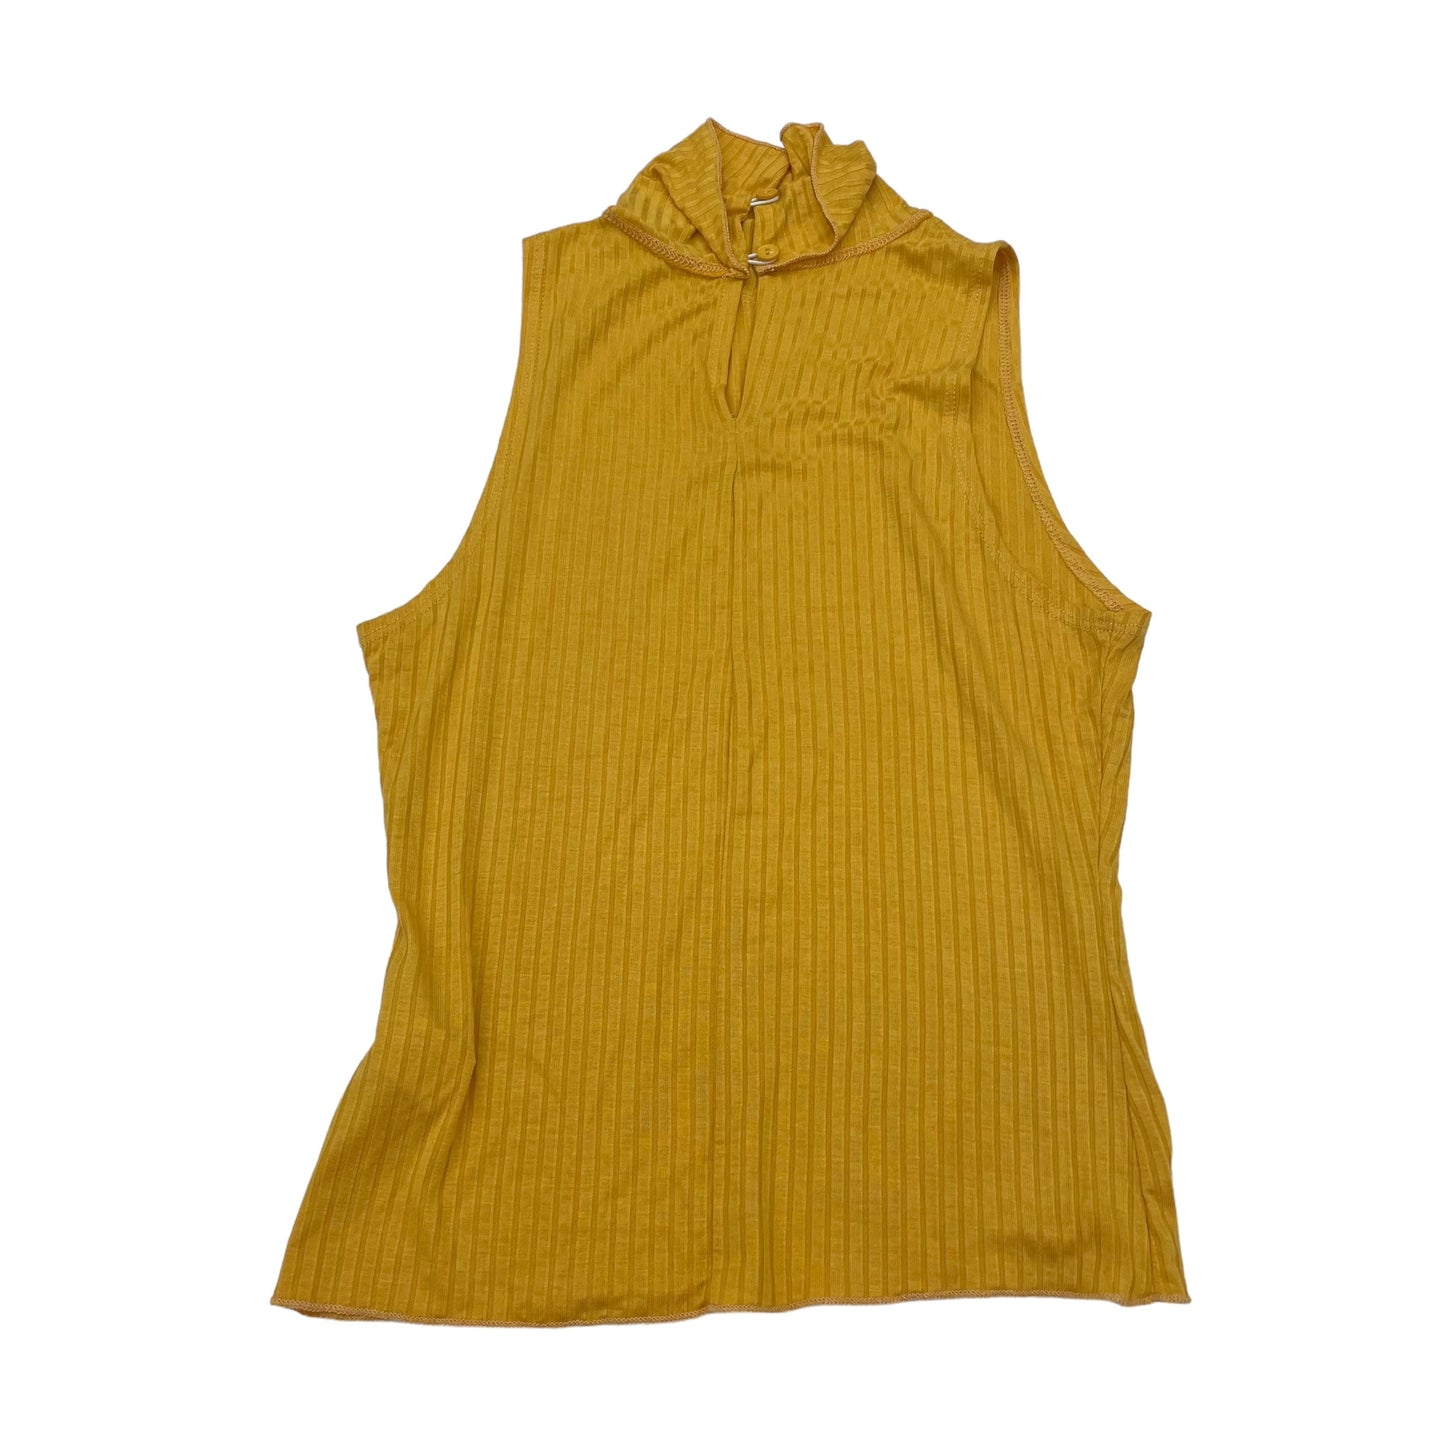 YELLOW    CLOTHES MENTOR TOP SLEEVELESS, Size S